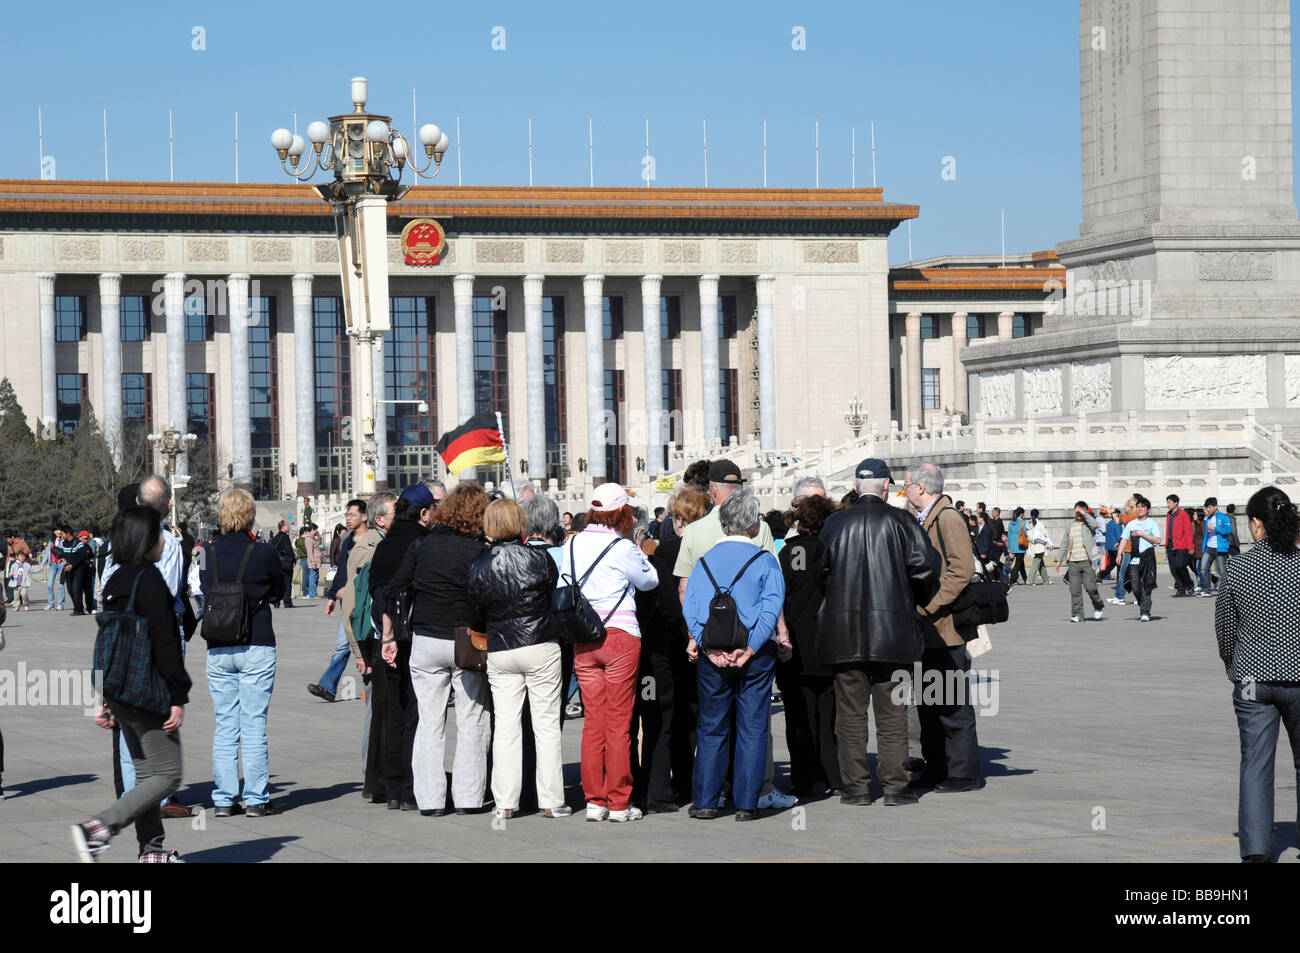 German tourist group on Tiananmen Square, Beijing, China. Great Hall of the People in the background. Stock Photo